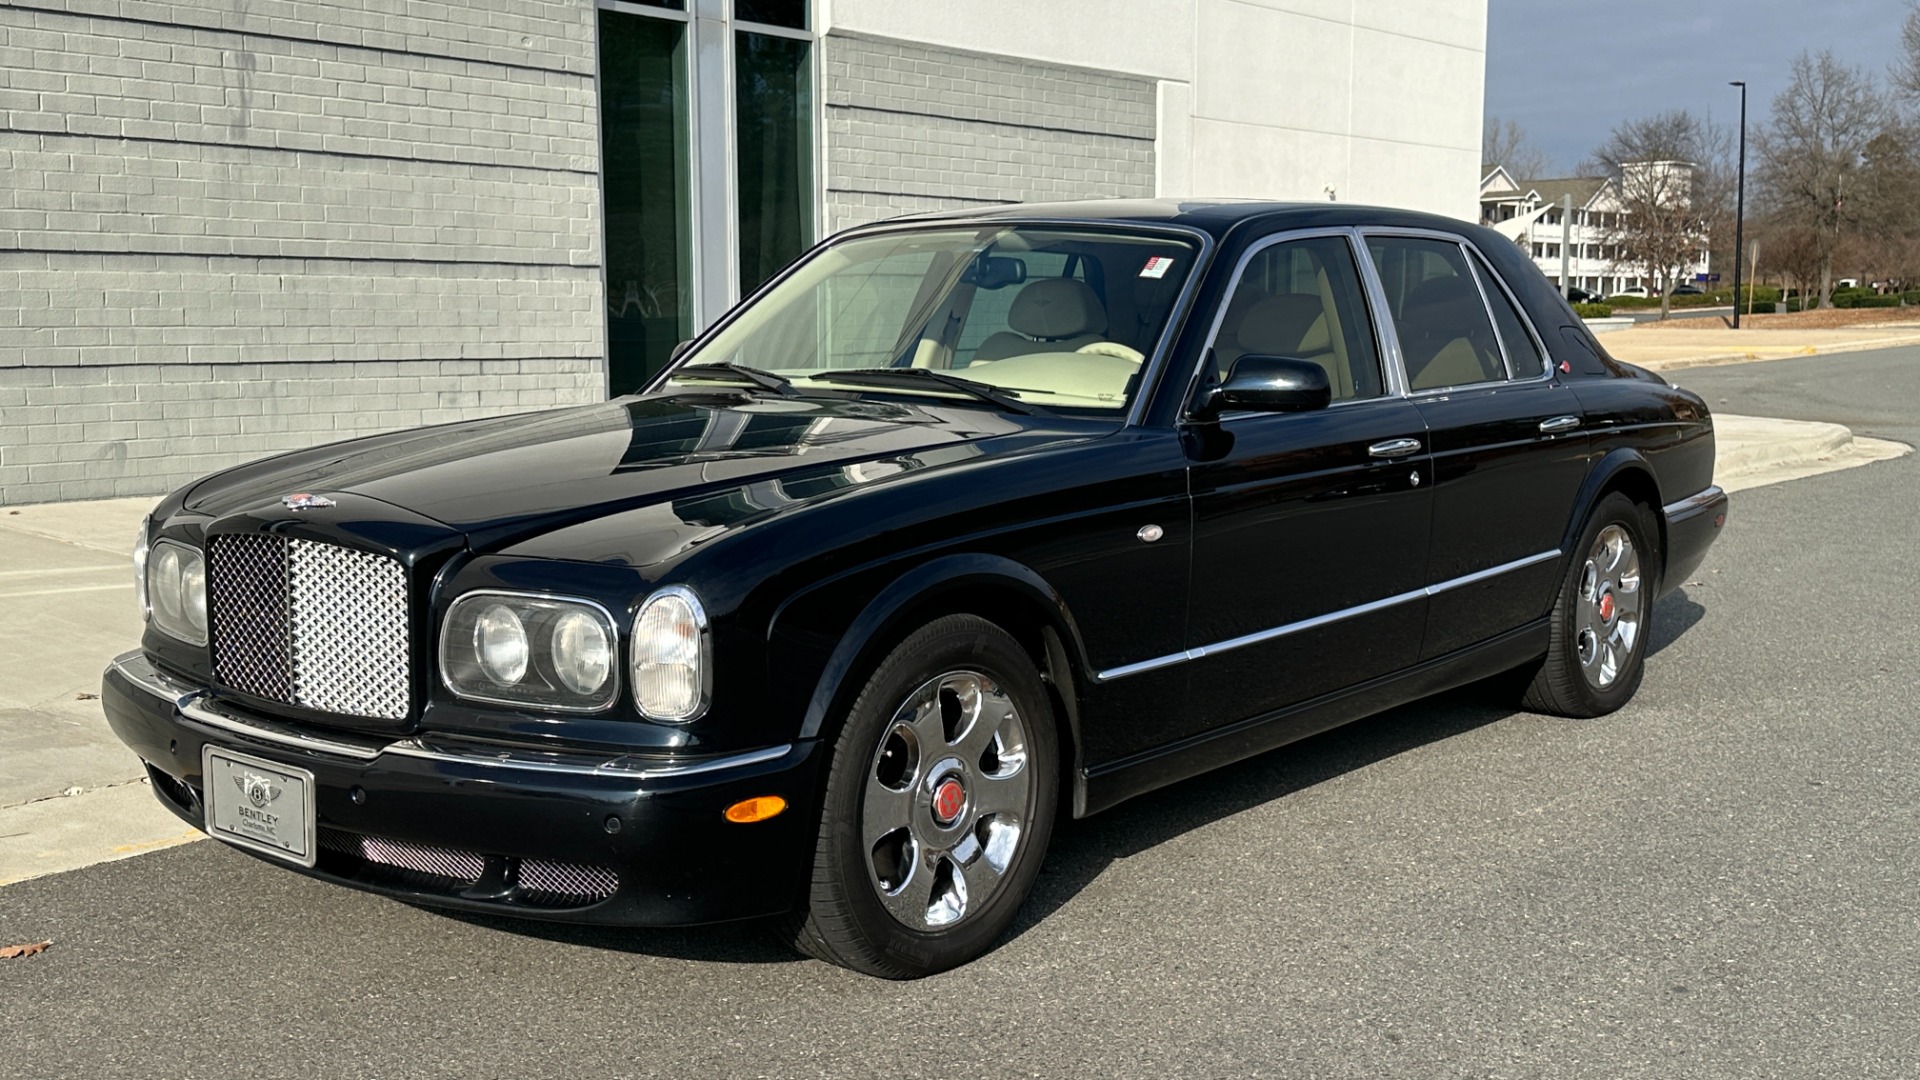 Used 2001 Bentley ARNAGE RED LABEL 6.75L V8 / TURBO / FULL LEATHER / WOOD TRIM / HEATED SEATS / SUNR for sale Sold at Formula Imports in Charlotte NC 28227 2